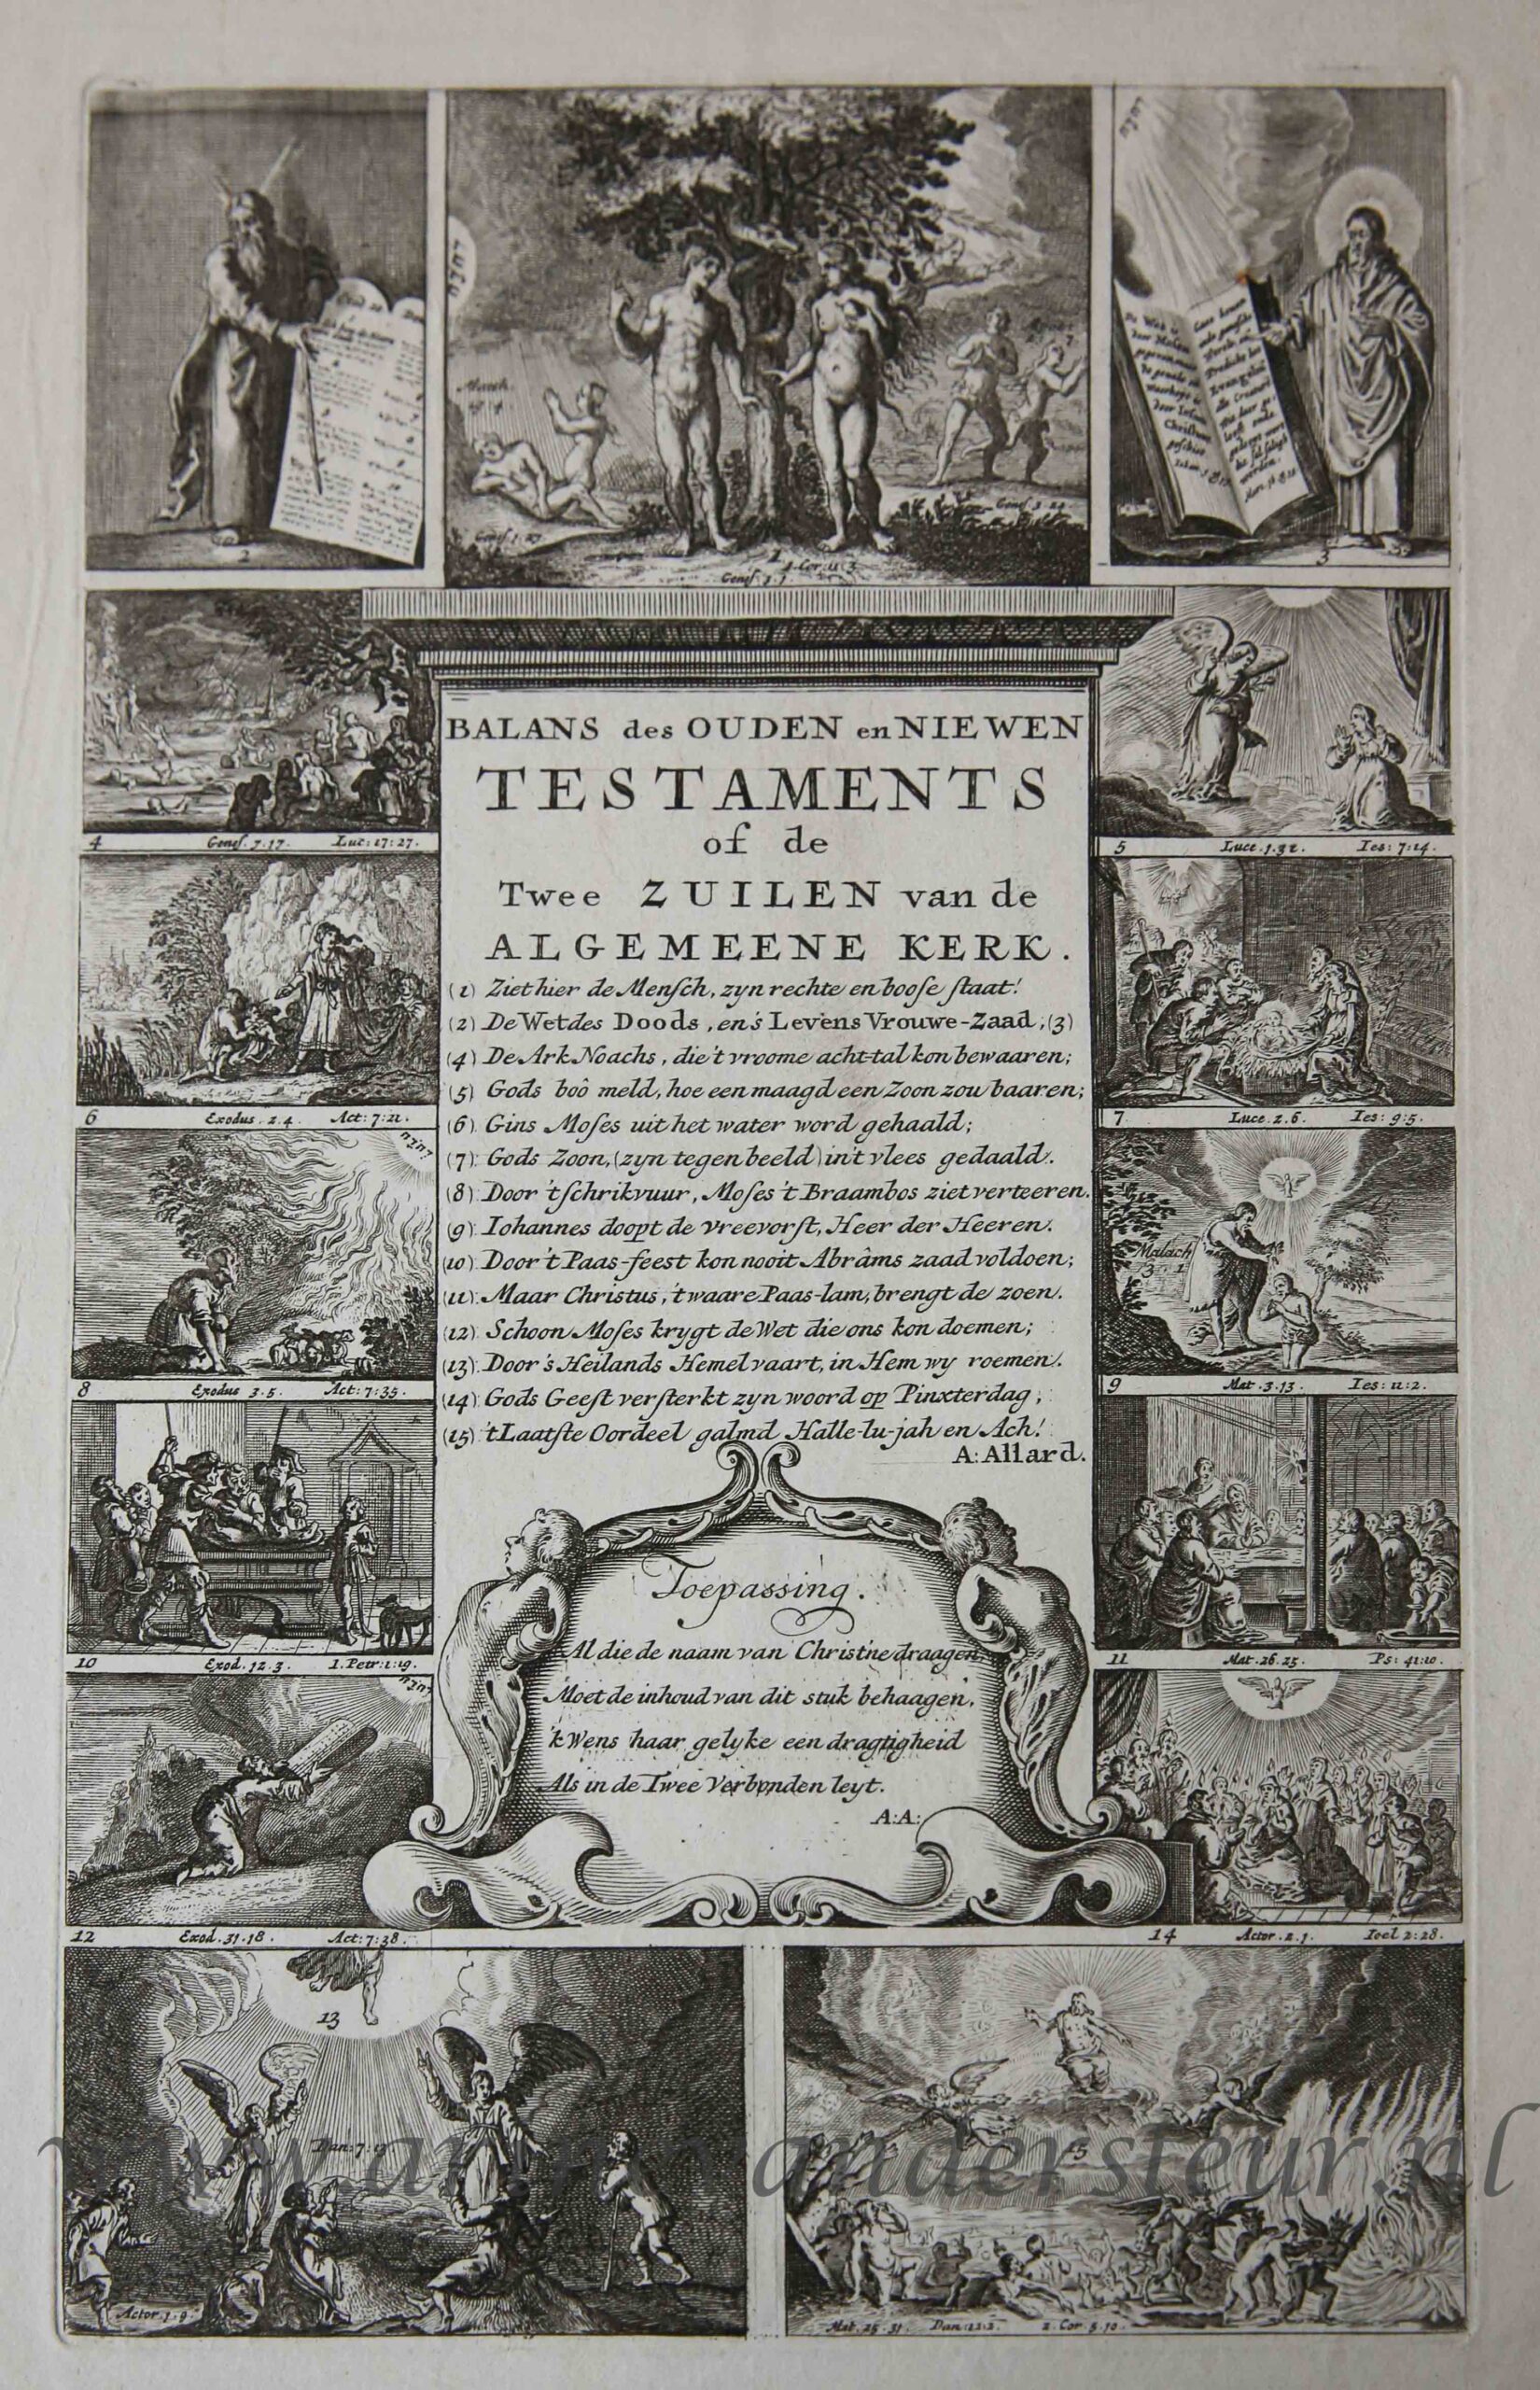 [Antique print, etching] Scenes from the Old and New Testaments; BALANS des OUDEN en NIEWEN TESTAMENTS, published ca. 1710, 1 p.